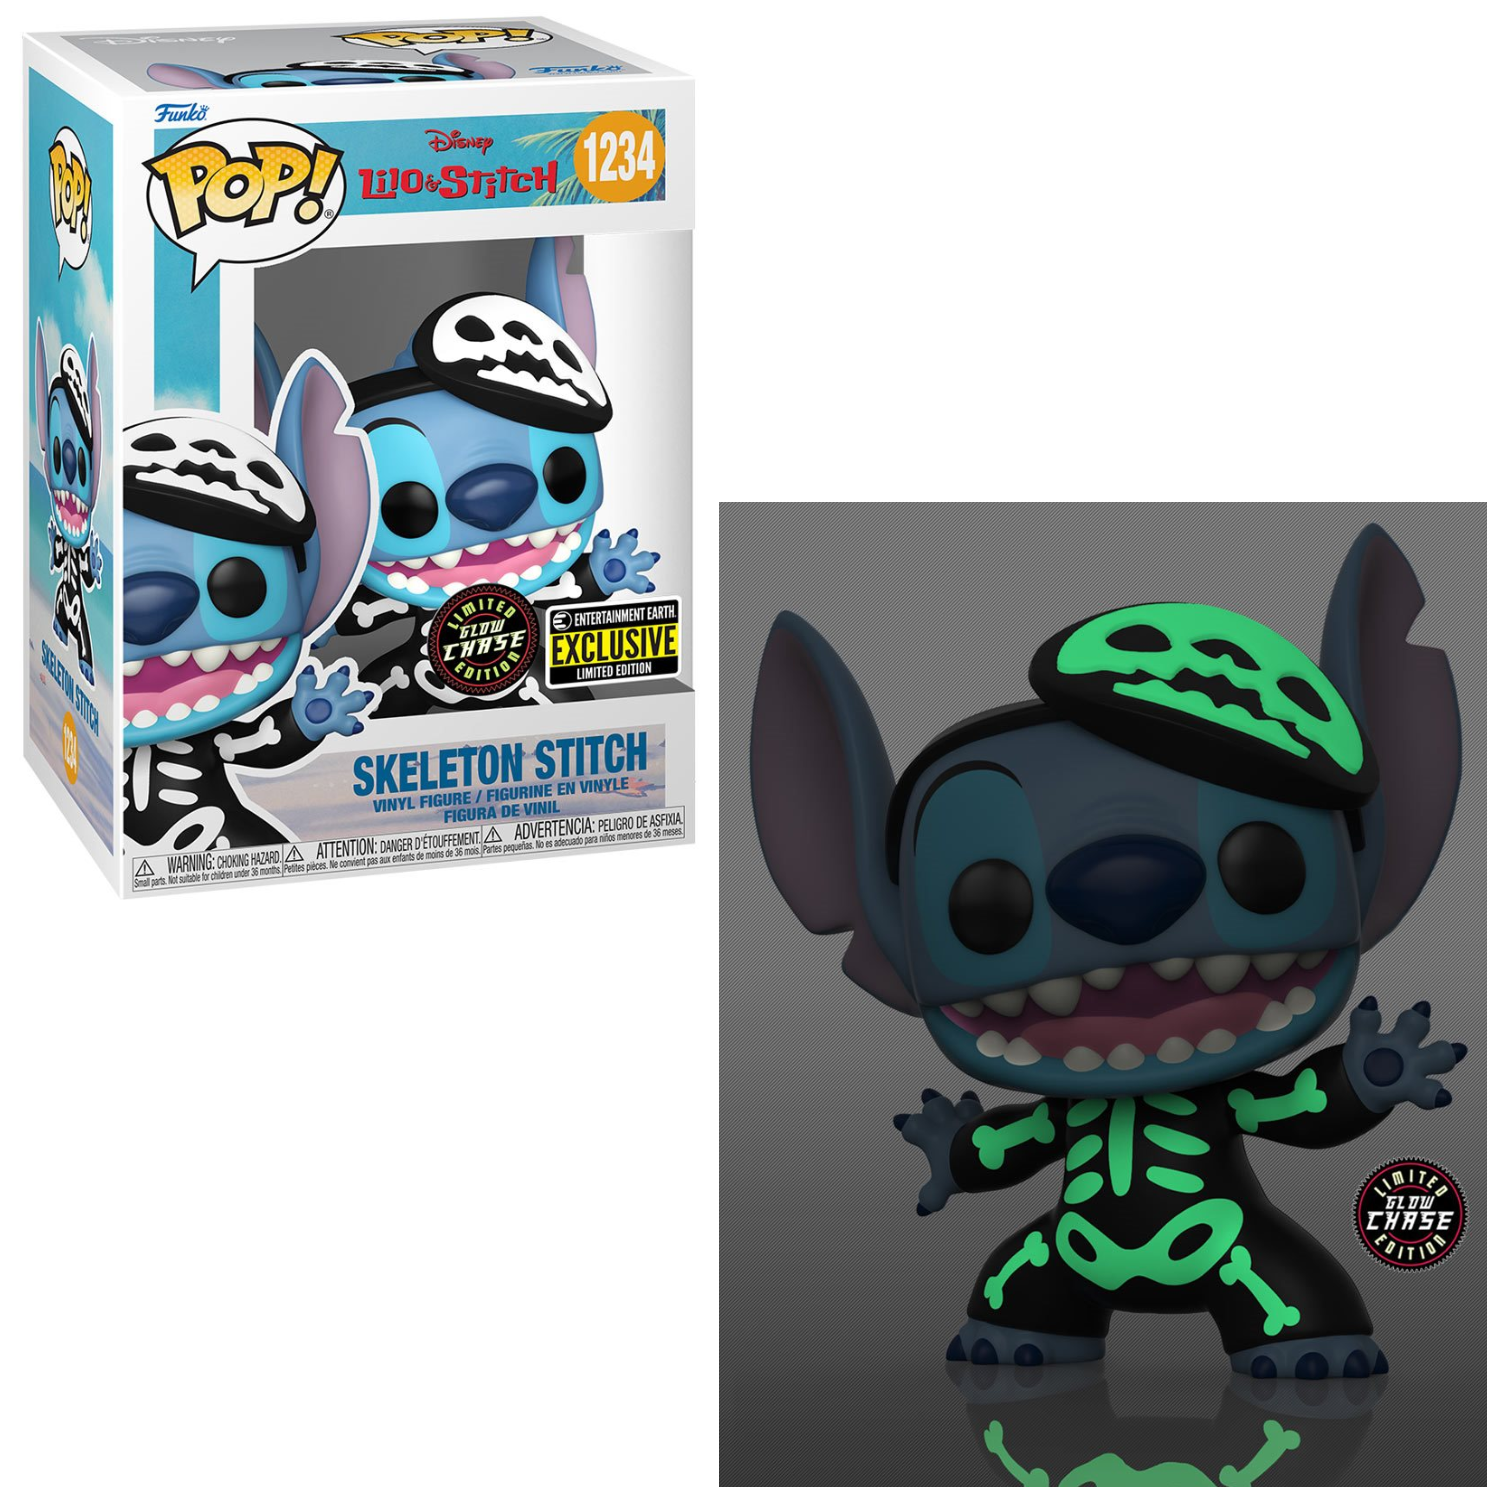 https://bigtoescollectibles.com/cdn/shop/files/Funko_POP__Disney_Lilo___Stitch_Skeleton_Stitch_EE_Entertainment_Earth_Exclusive_Glow_Chase_1487x.png?v=1685736516